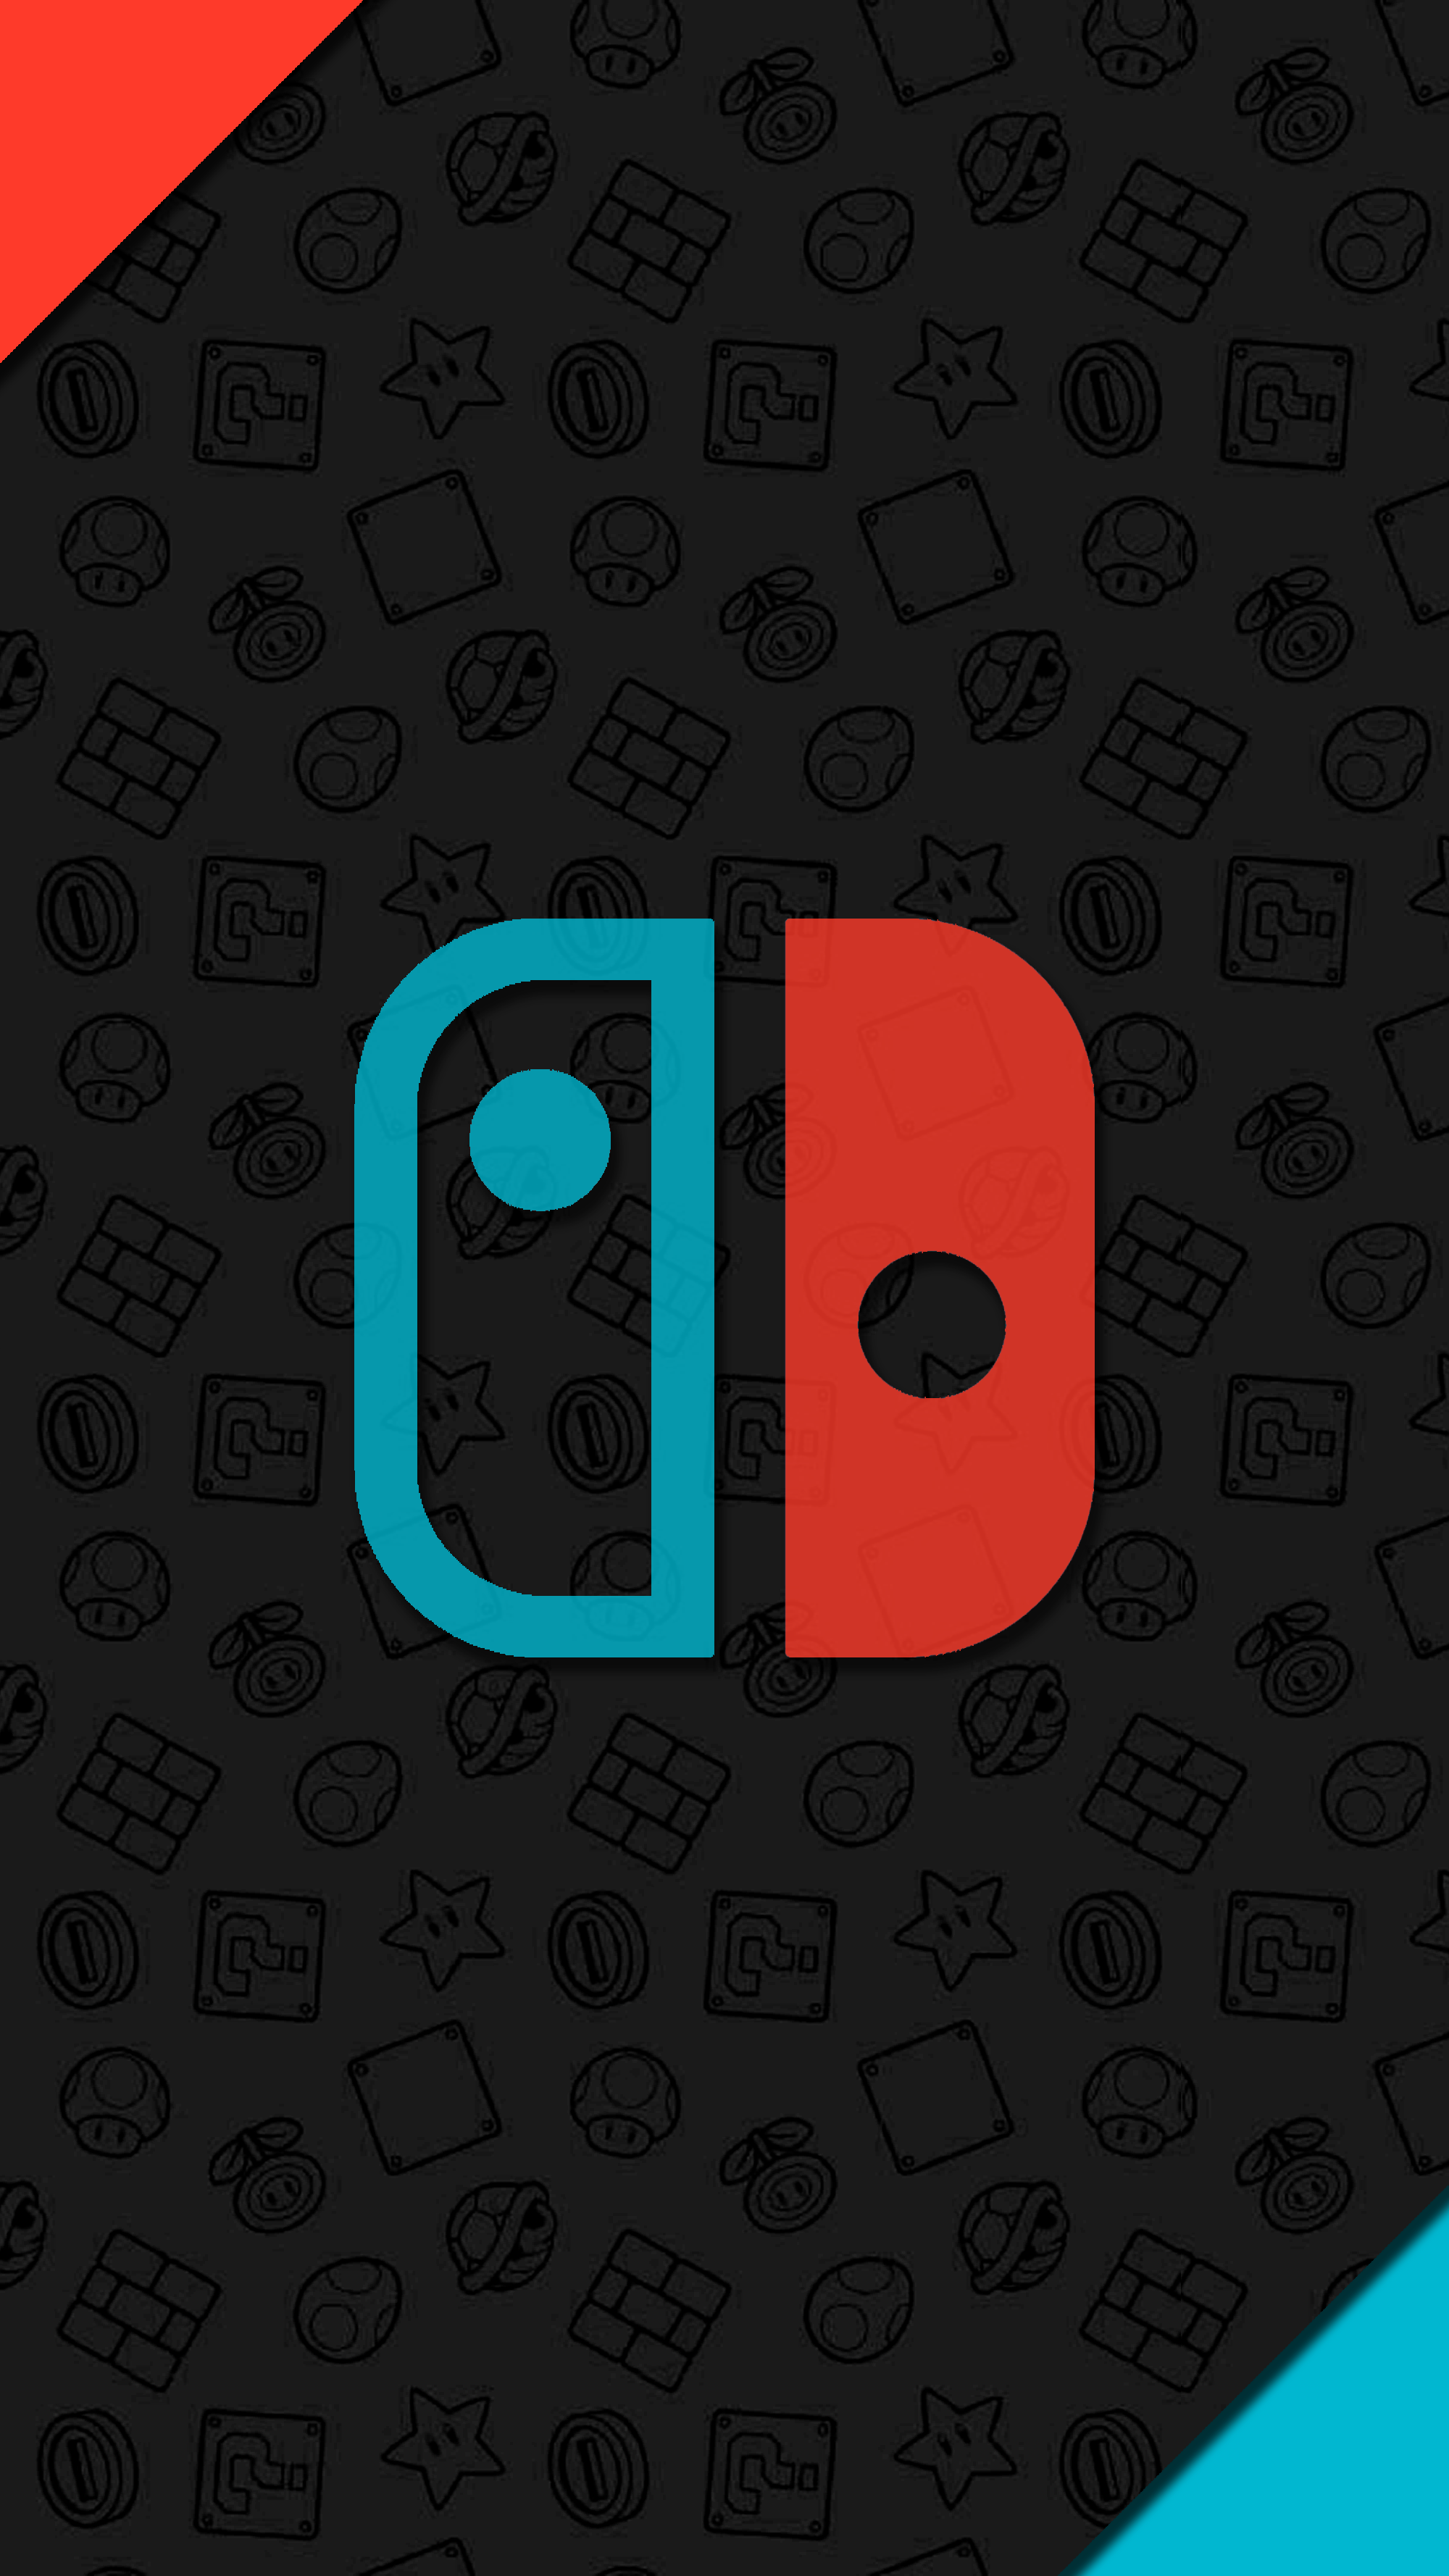 Nintendo Switch Wallpaper for your phone High re #nintendo Switch